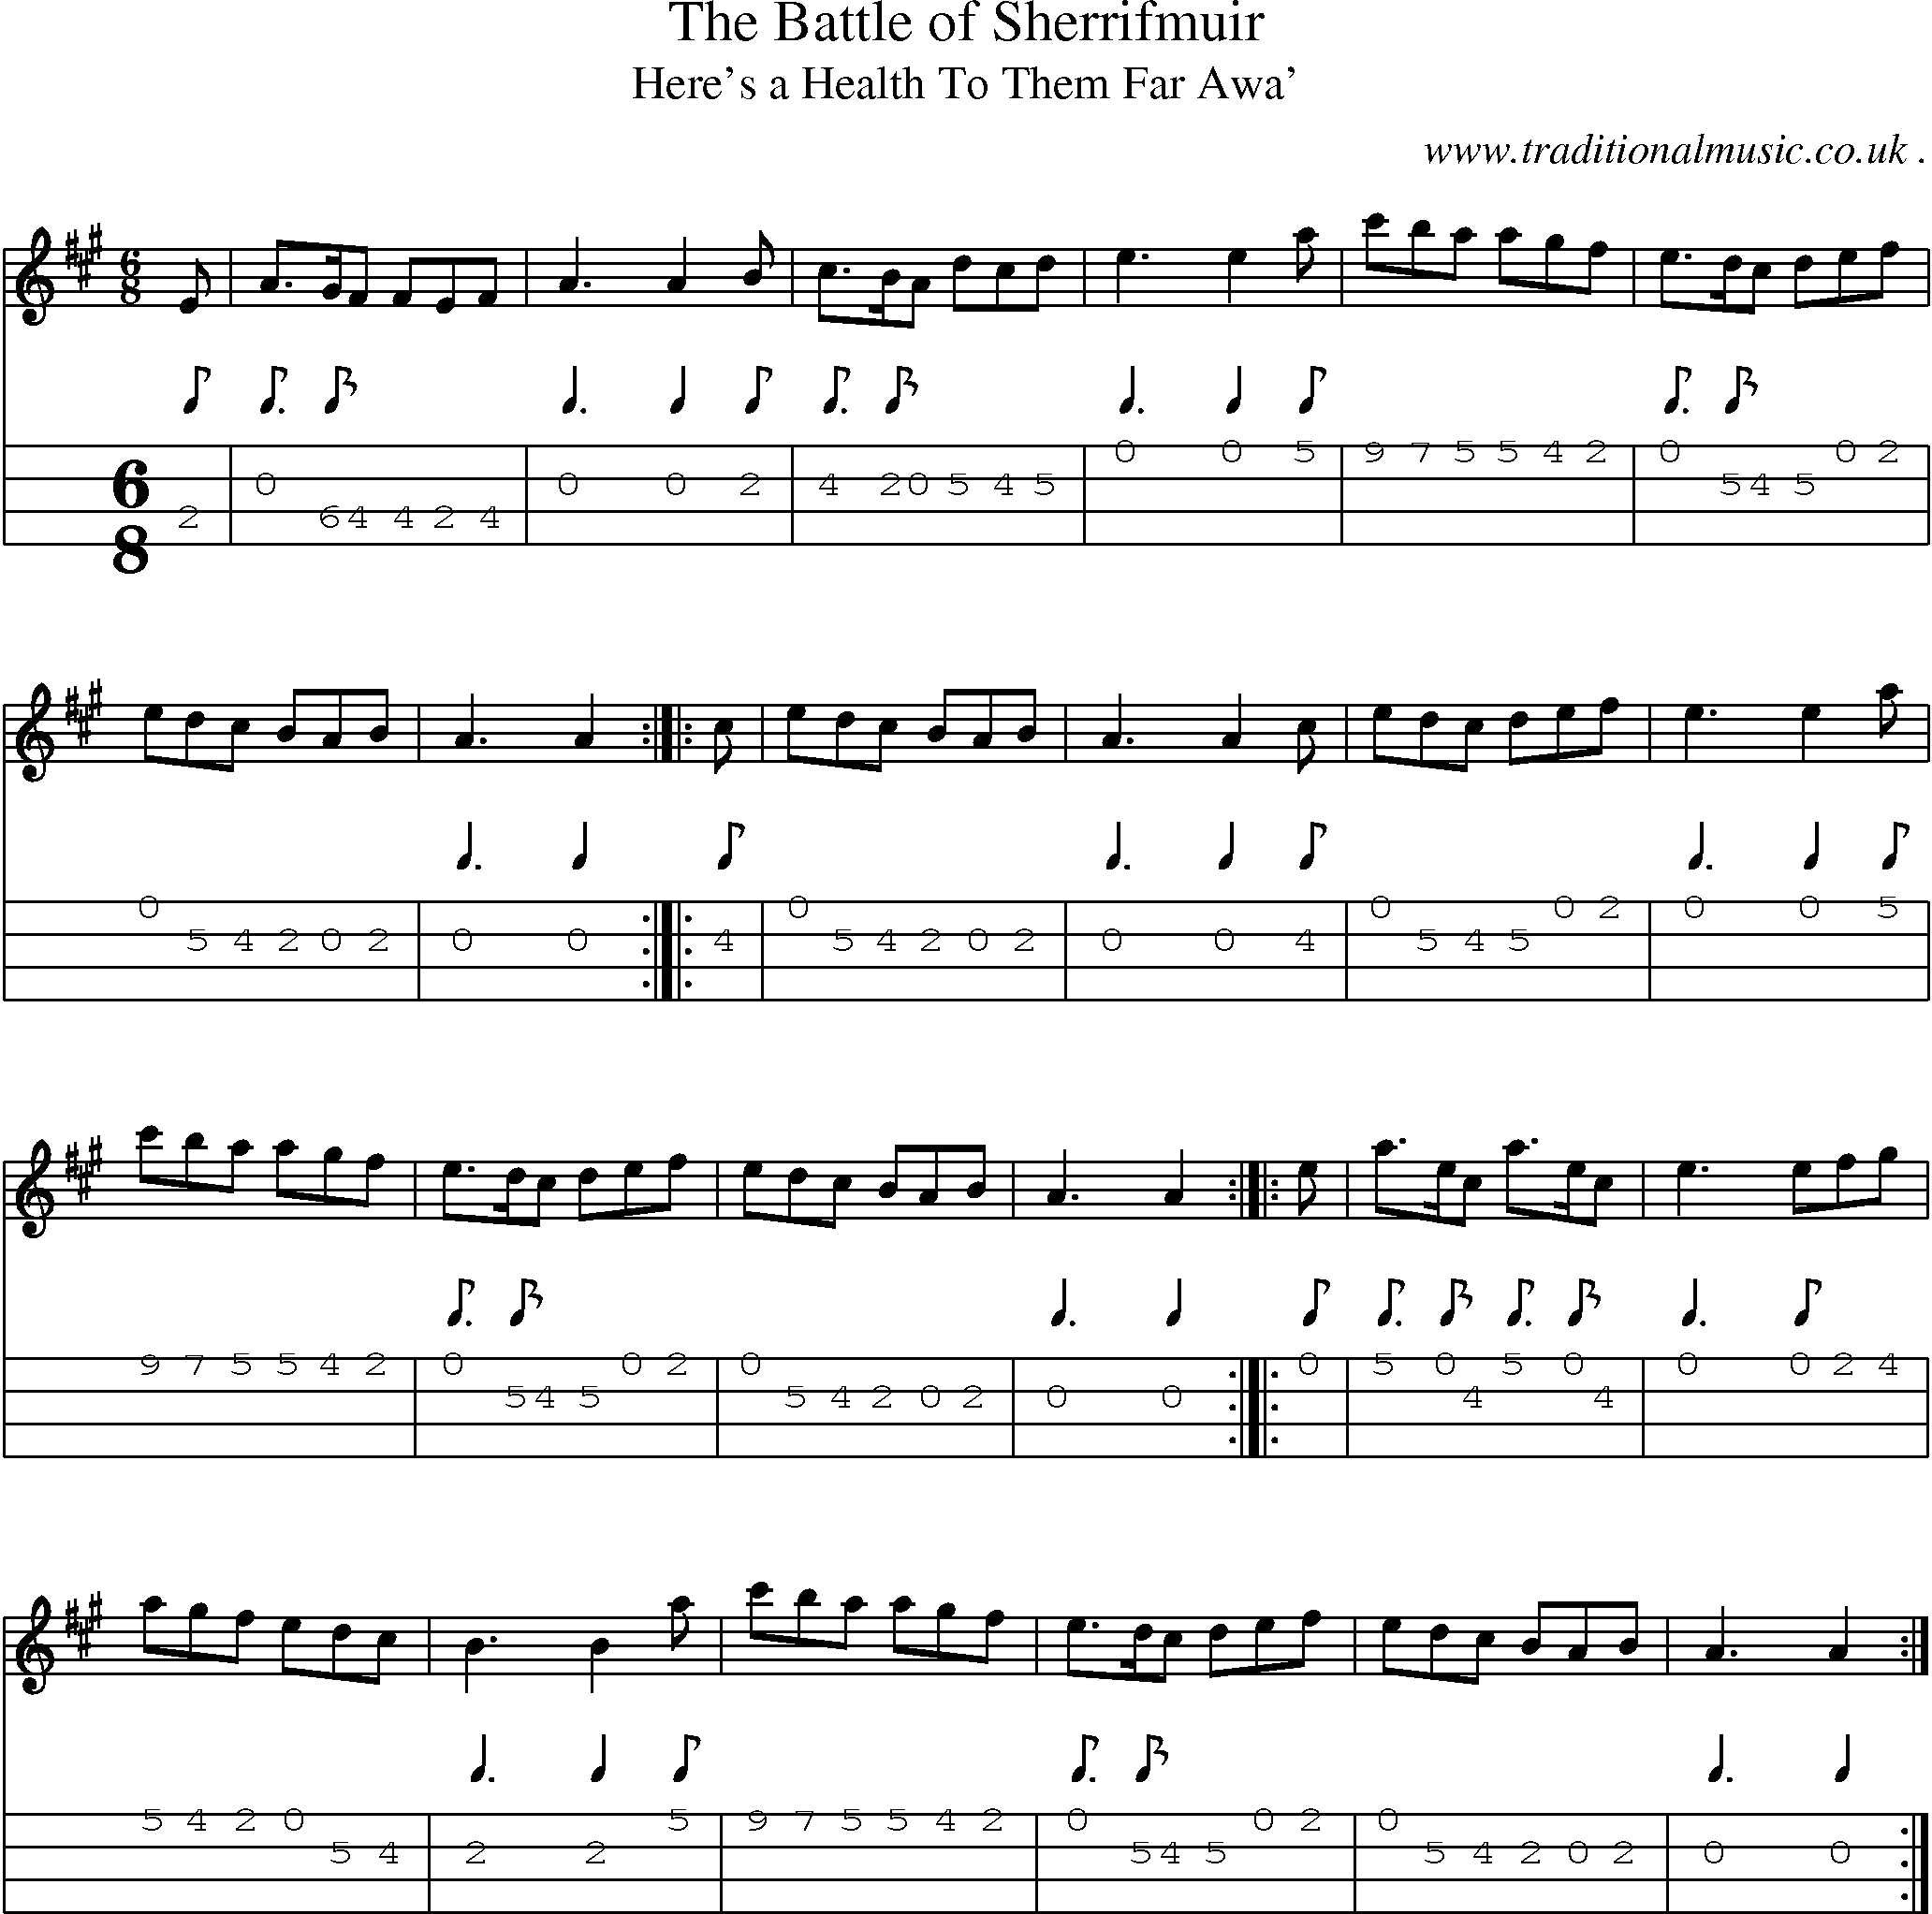 Sheet-music  score, Chords and Mandolin Tabs for The Battle Of Sherrifmuir